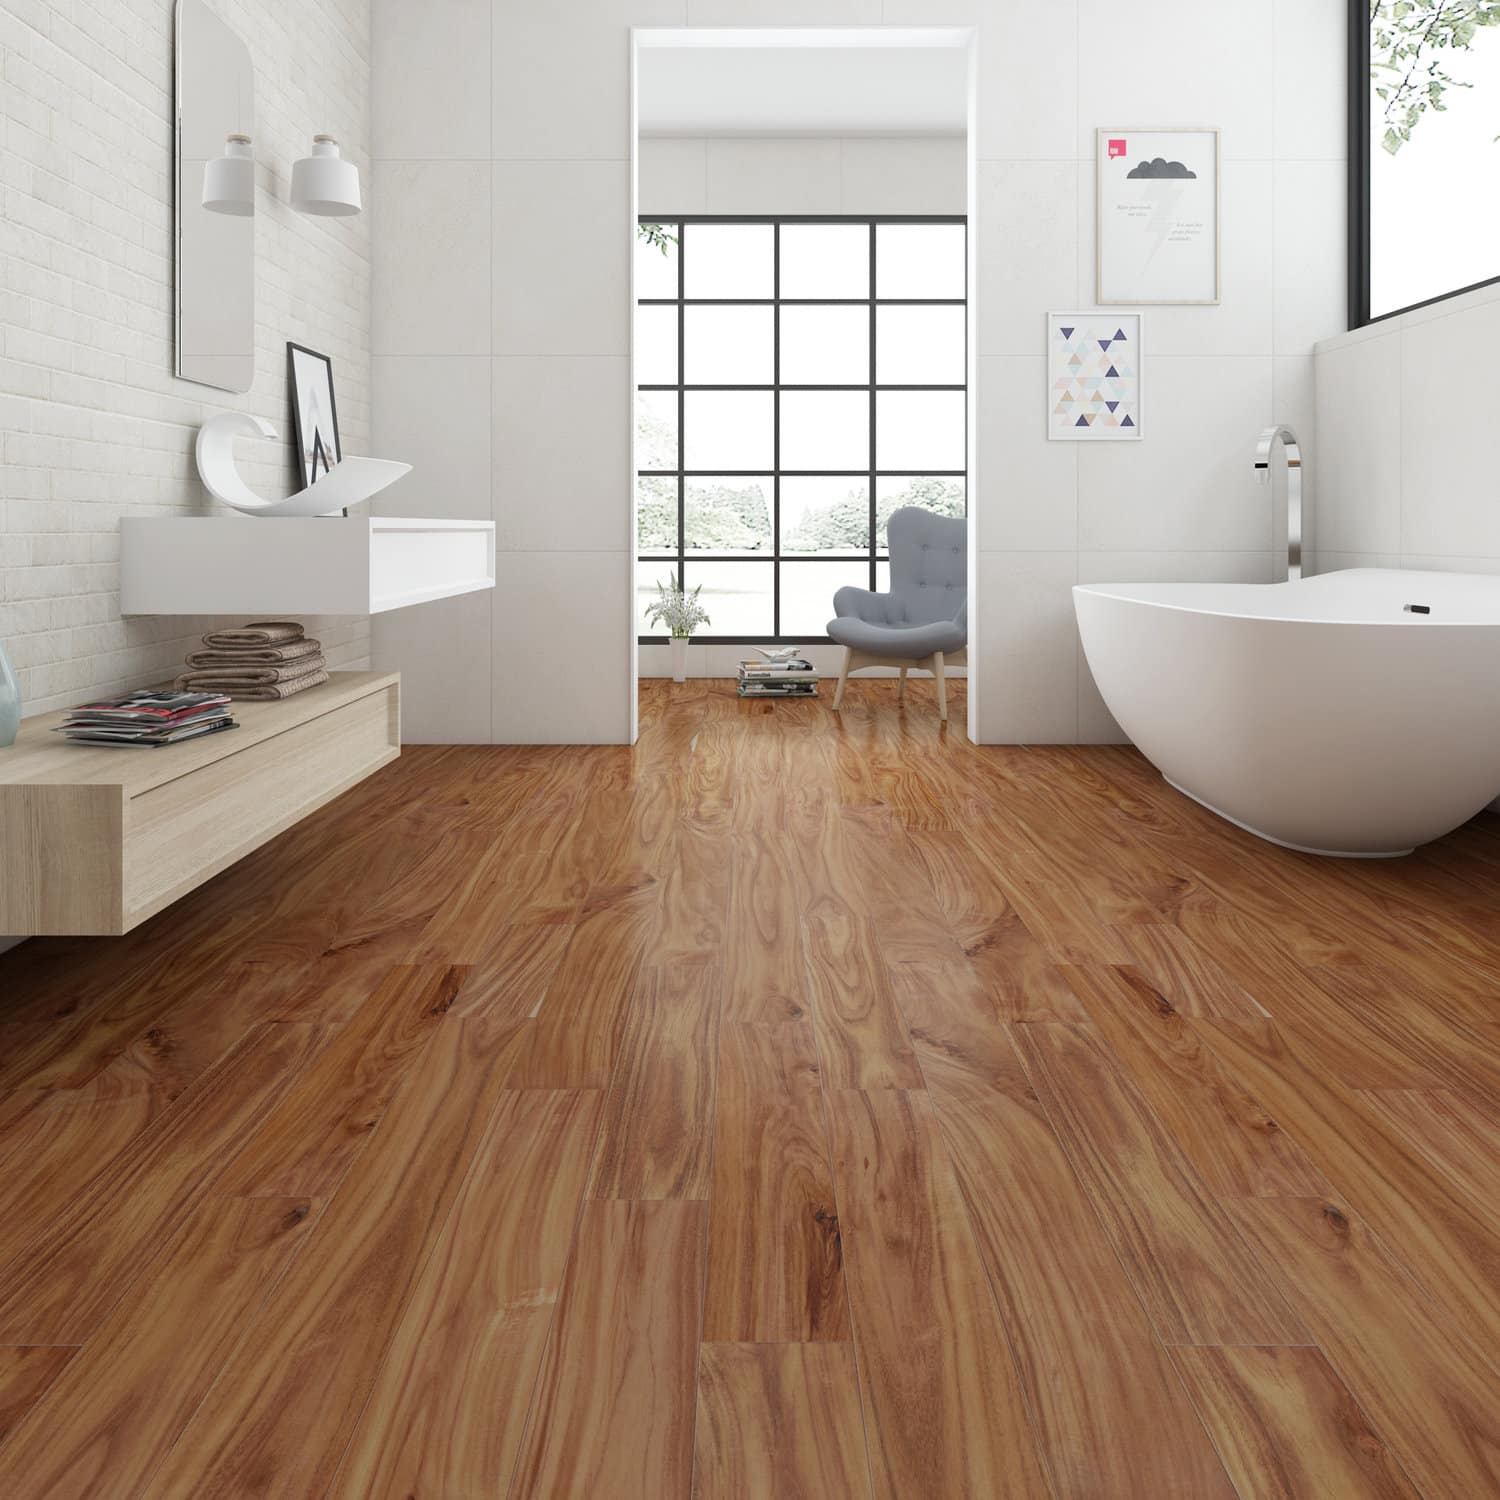 Wooden Floors: Trend Analysis | Style or Fad?